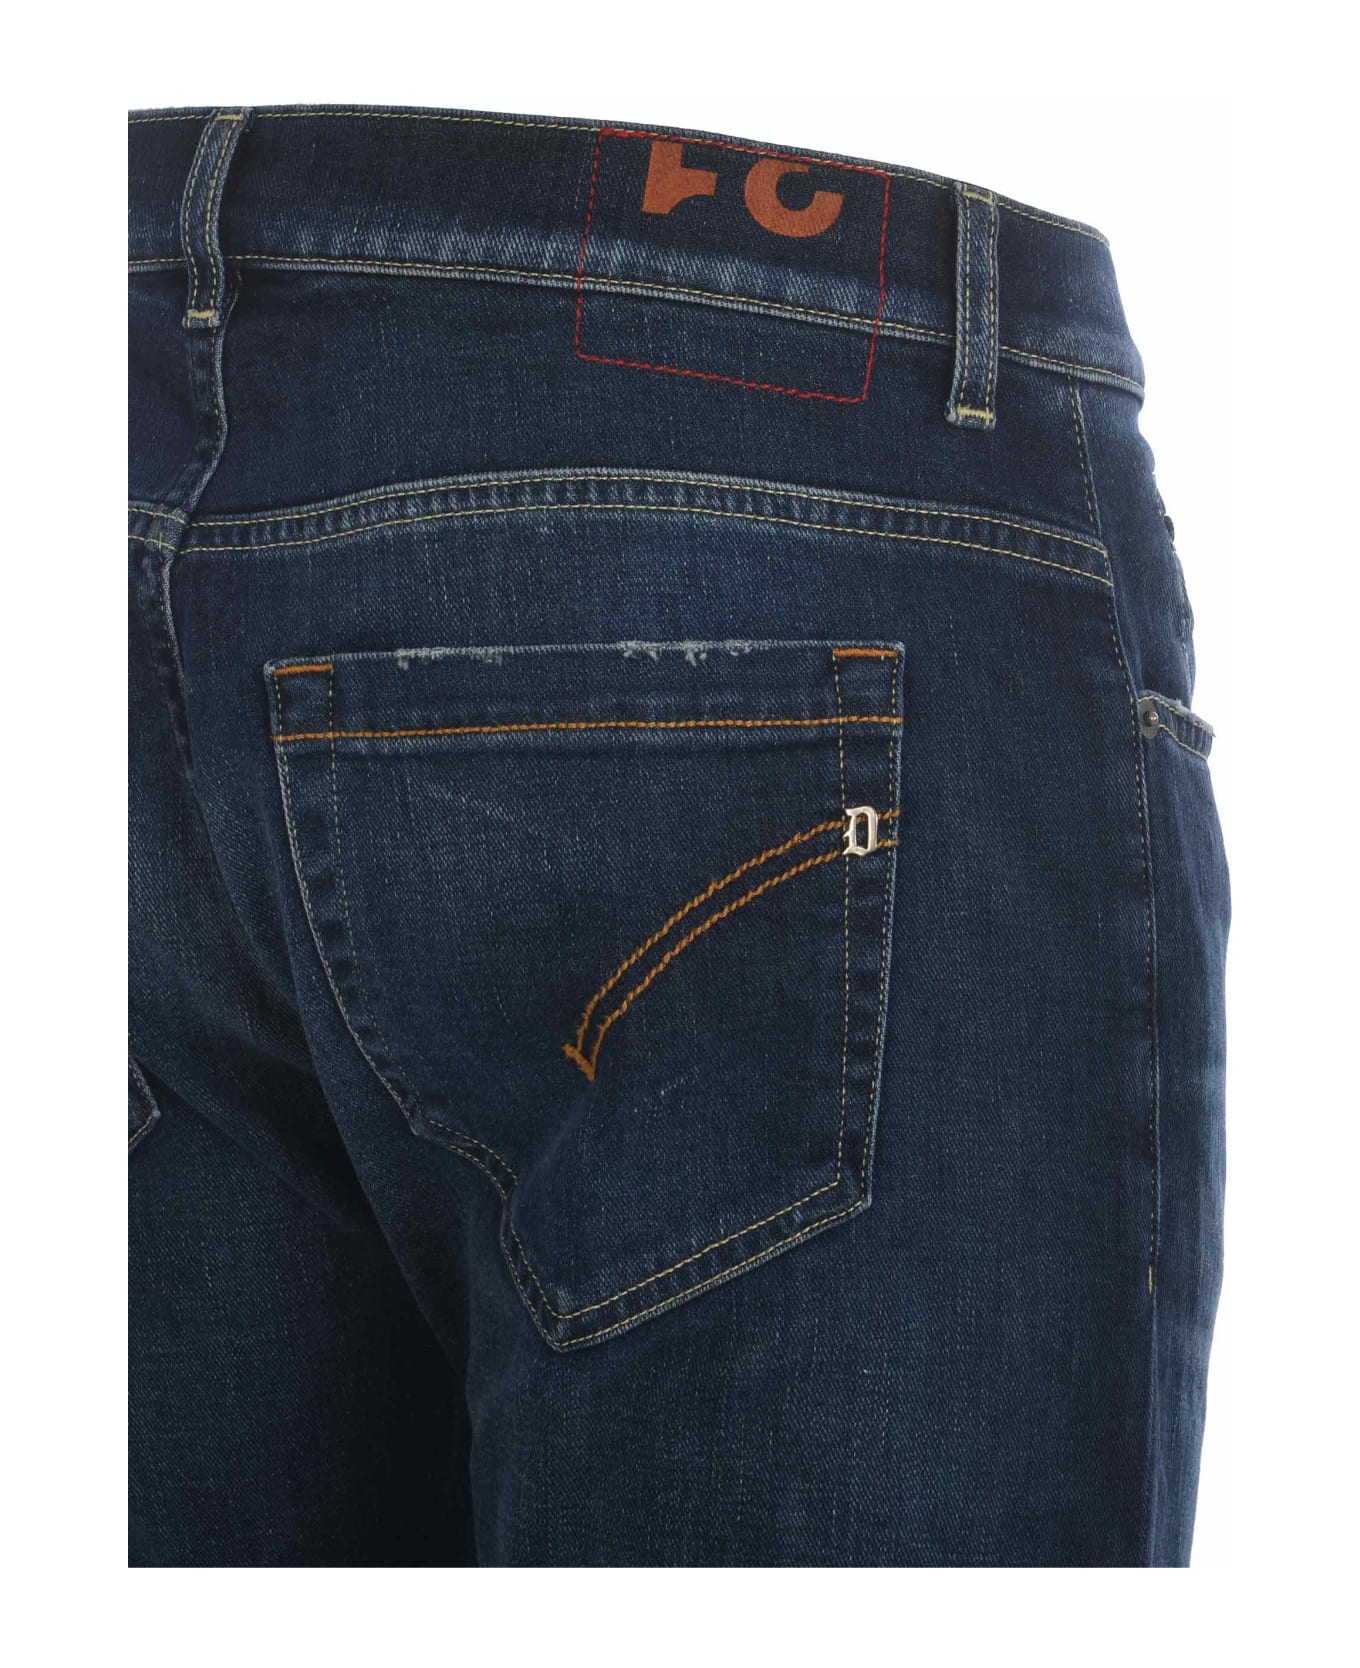 Dondup 'george' Jeans - BLUE ボトムス